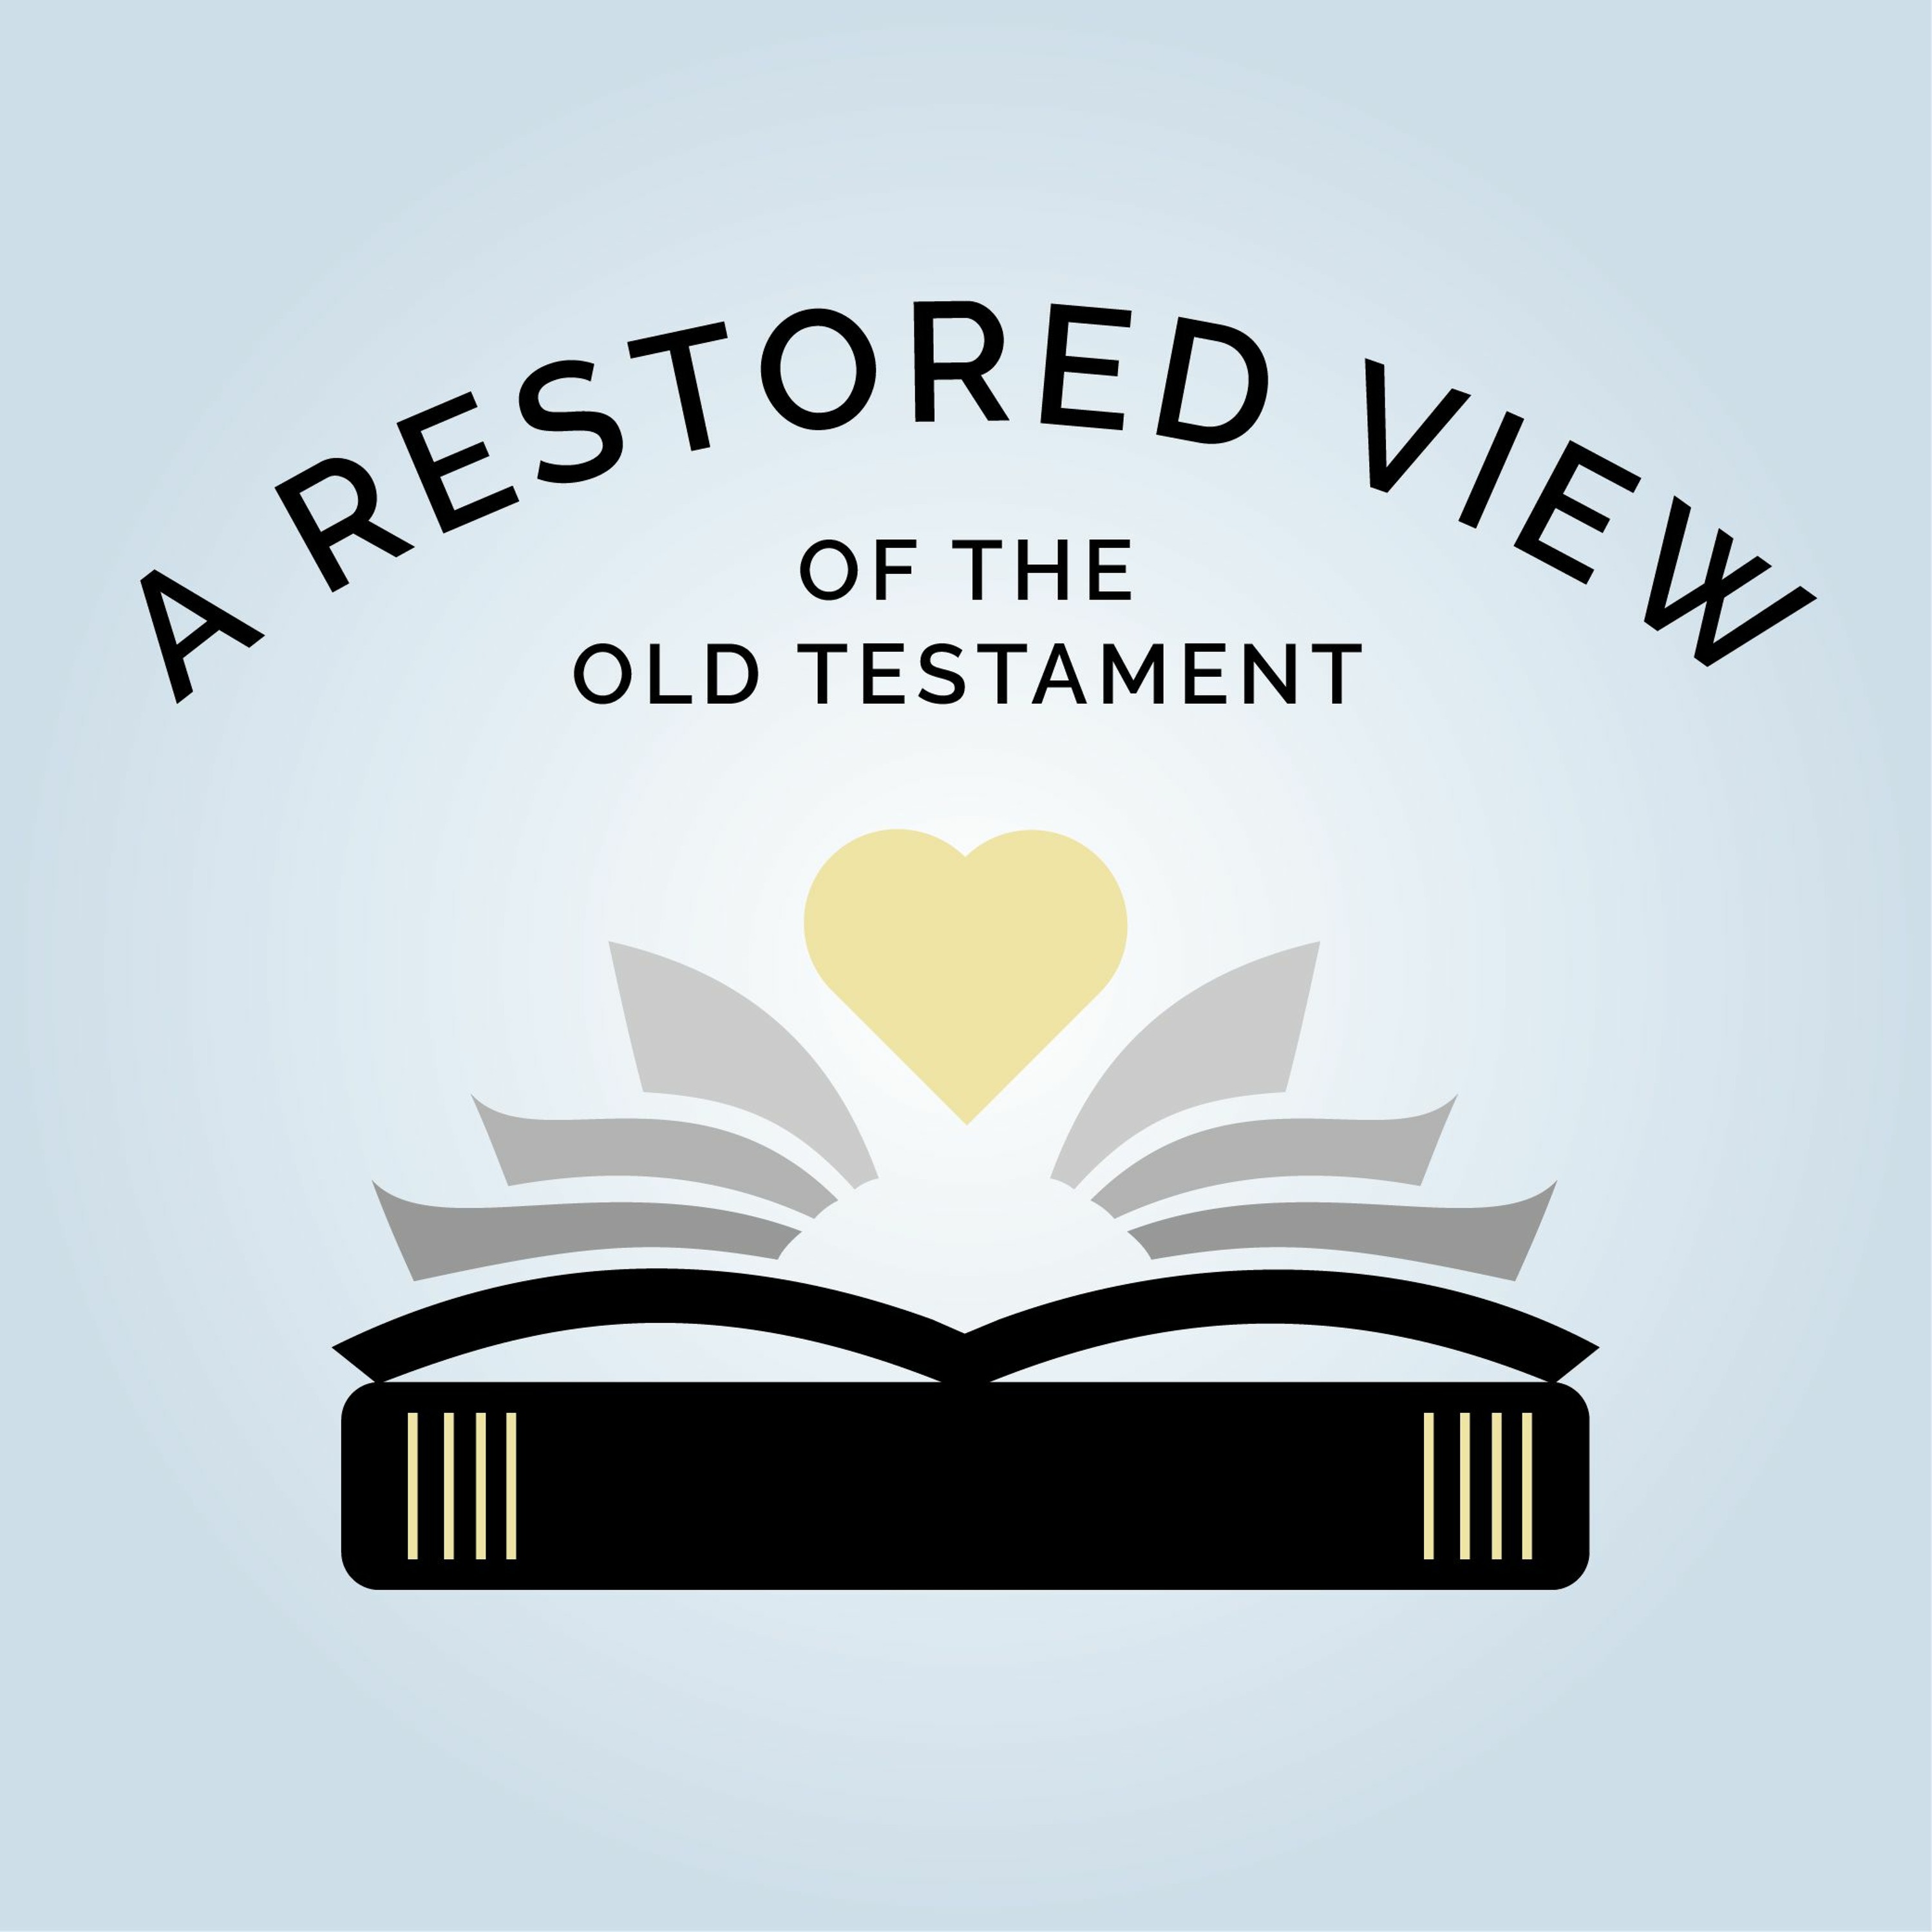 A Restored View of the Old Testament (Come, Follow Me Episode 1: Genesis 1-3, Moses 1-3)